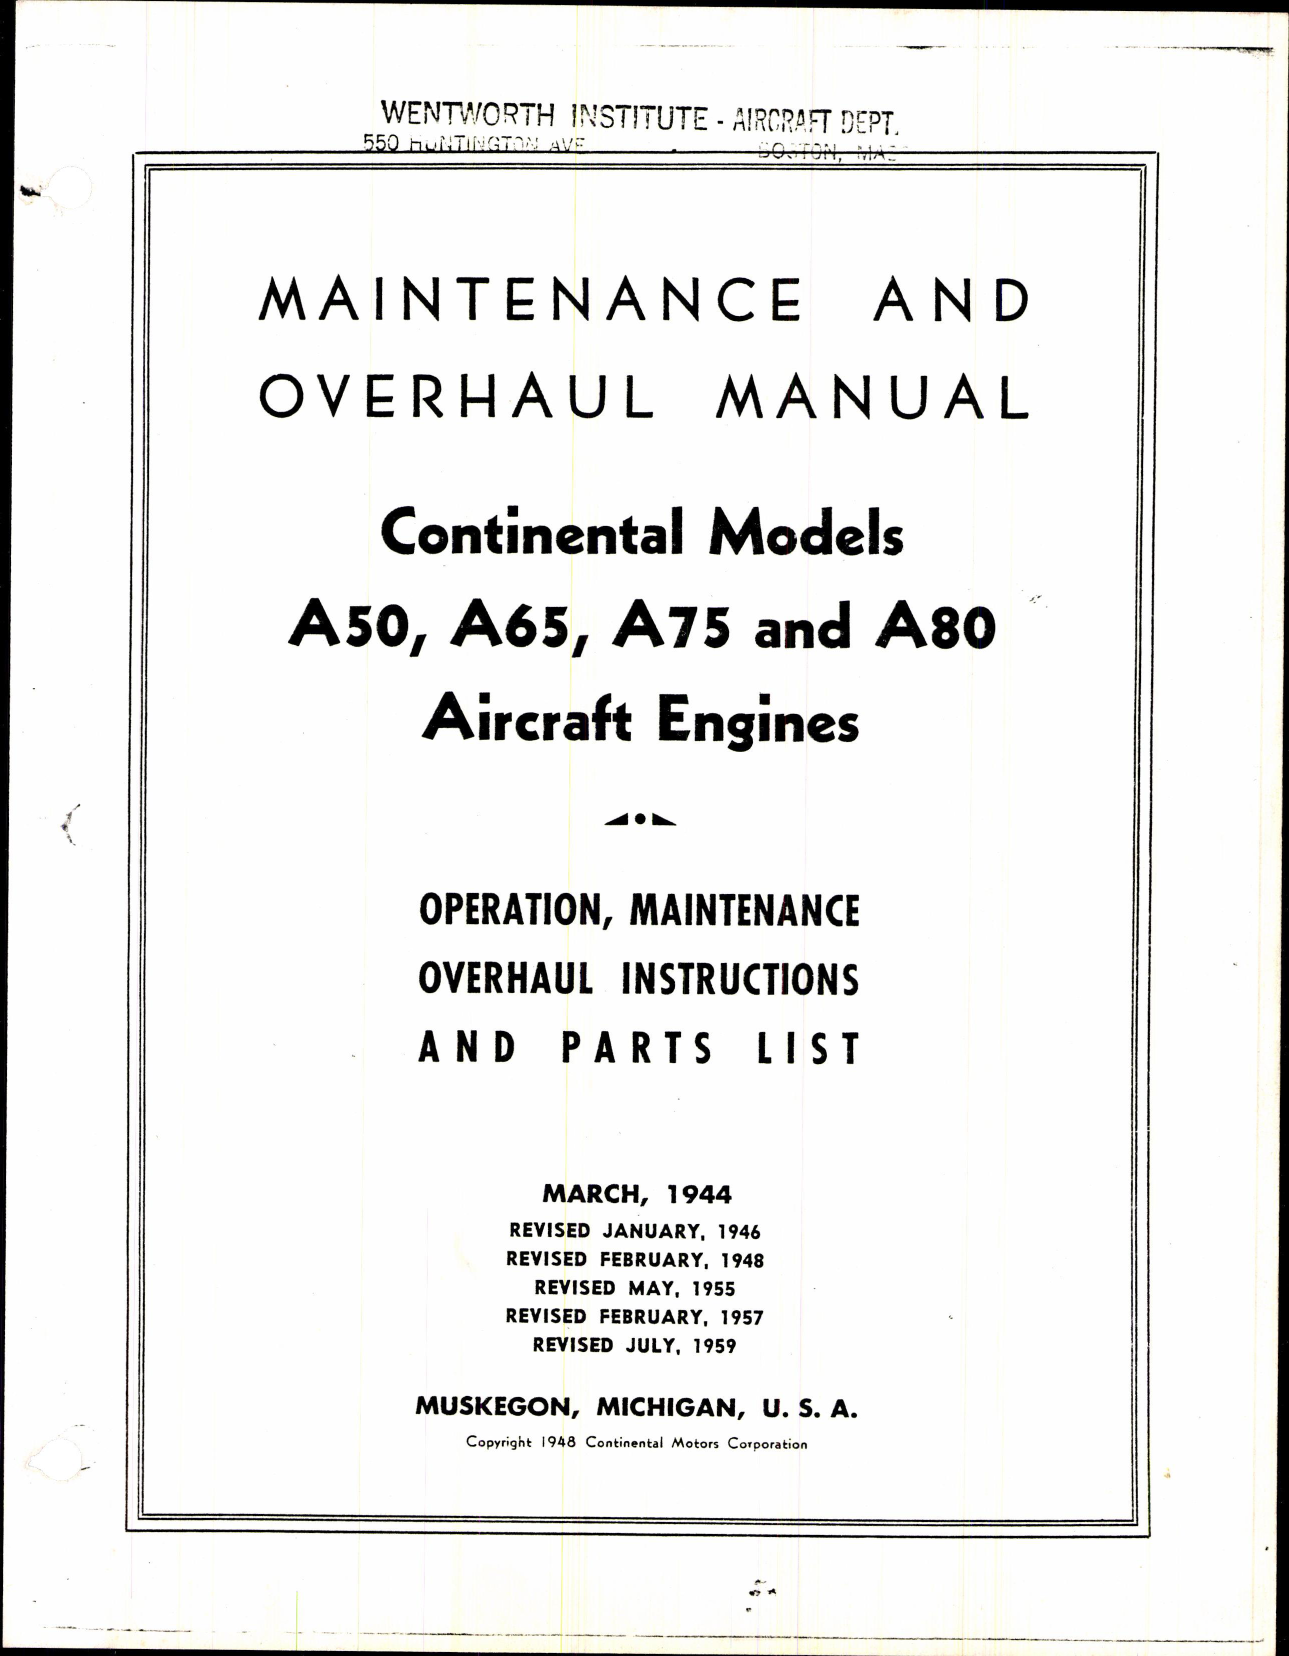 Sample page 1 from AirCorps Library document: Maintenance & Overhaul Manual for Continental Models A50